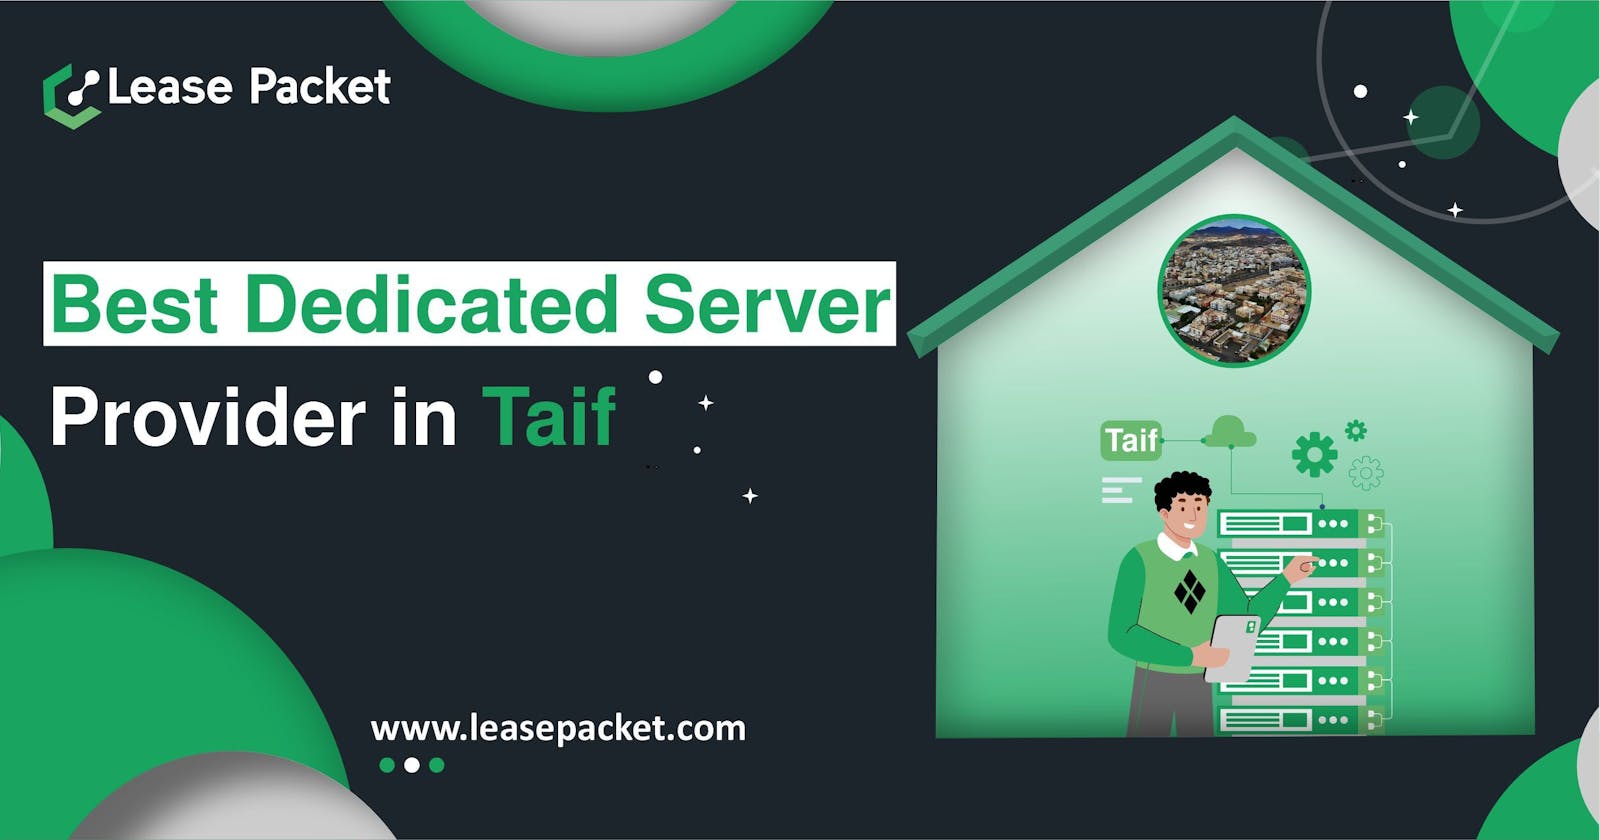 Why Lease Packet is the Best Dedicated Server Provider in Taif